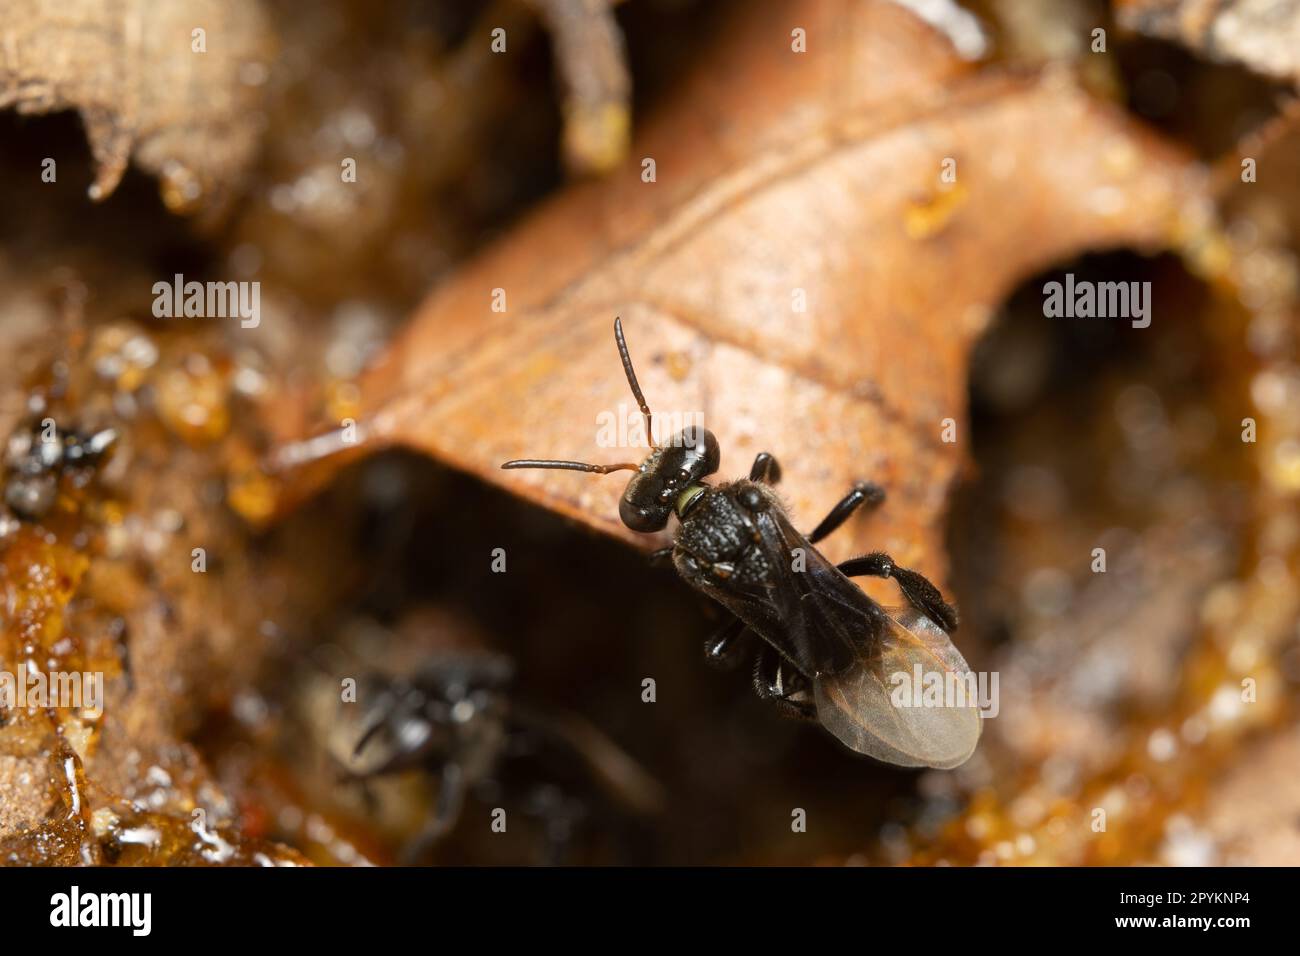 A stingless bee sitting on a dead leaf on the forest floor. Stock Photo